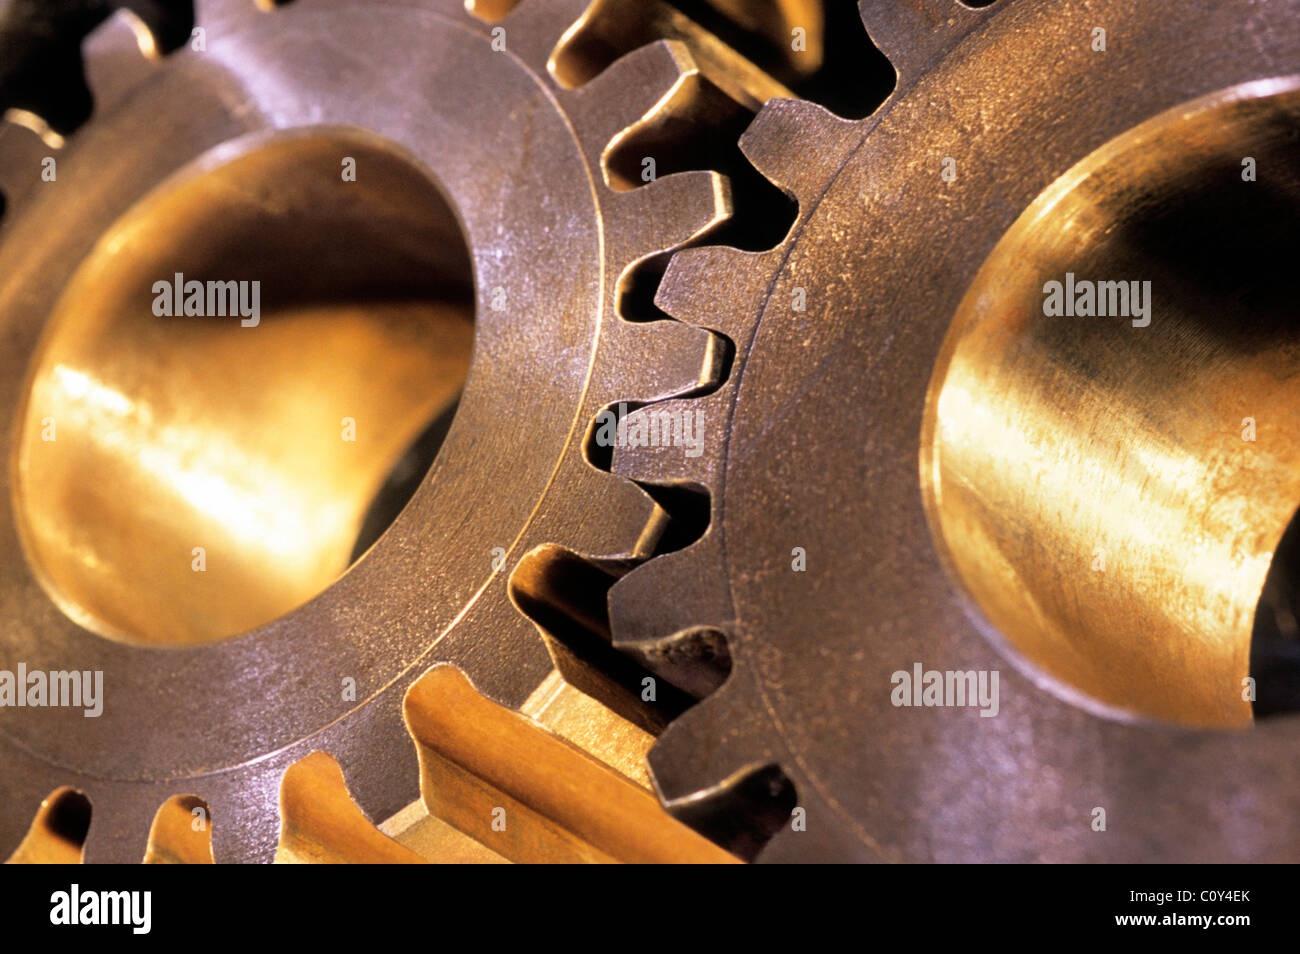 Mechanical gears, gear, cogs, cog. Spur gears. Heavy industrial machinery joined, interlocked, working together. Automation components close up detail Stock Photo